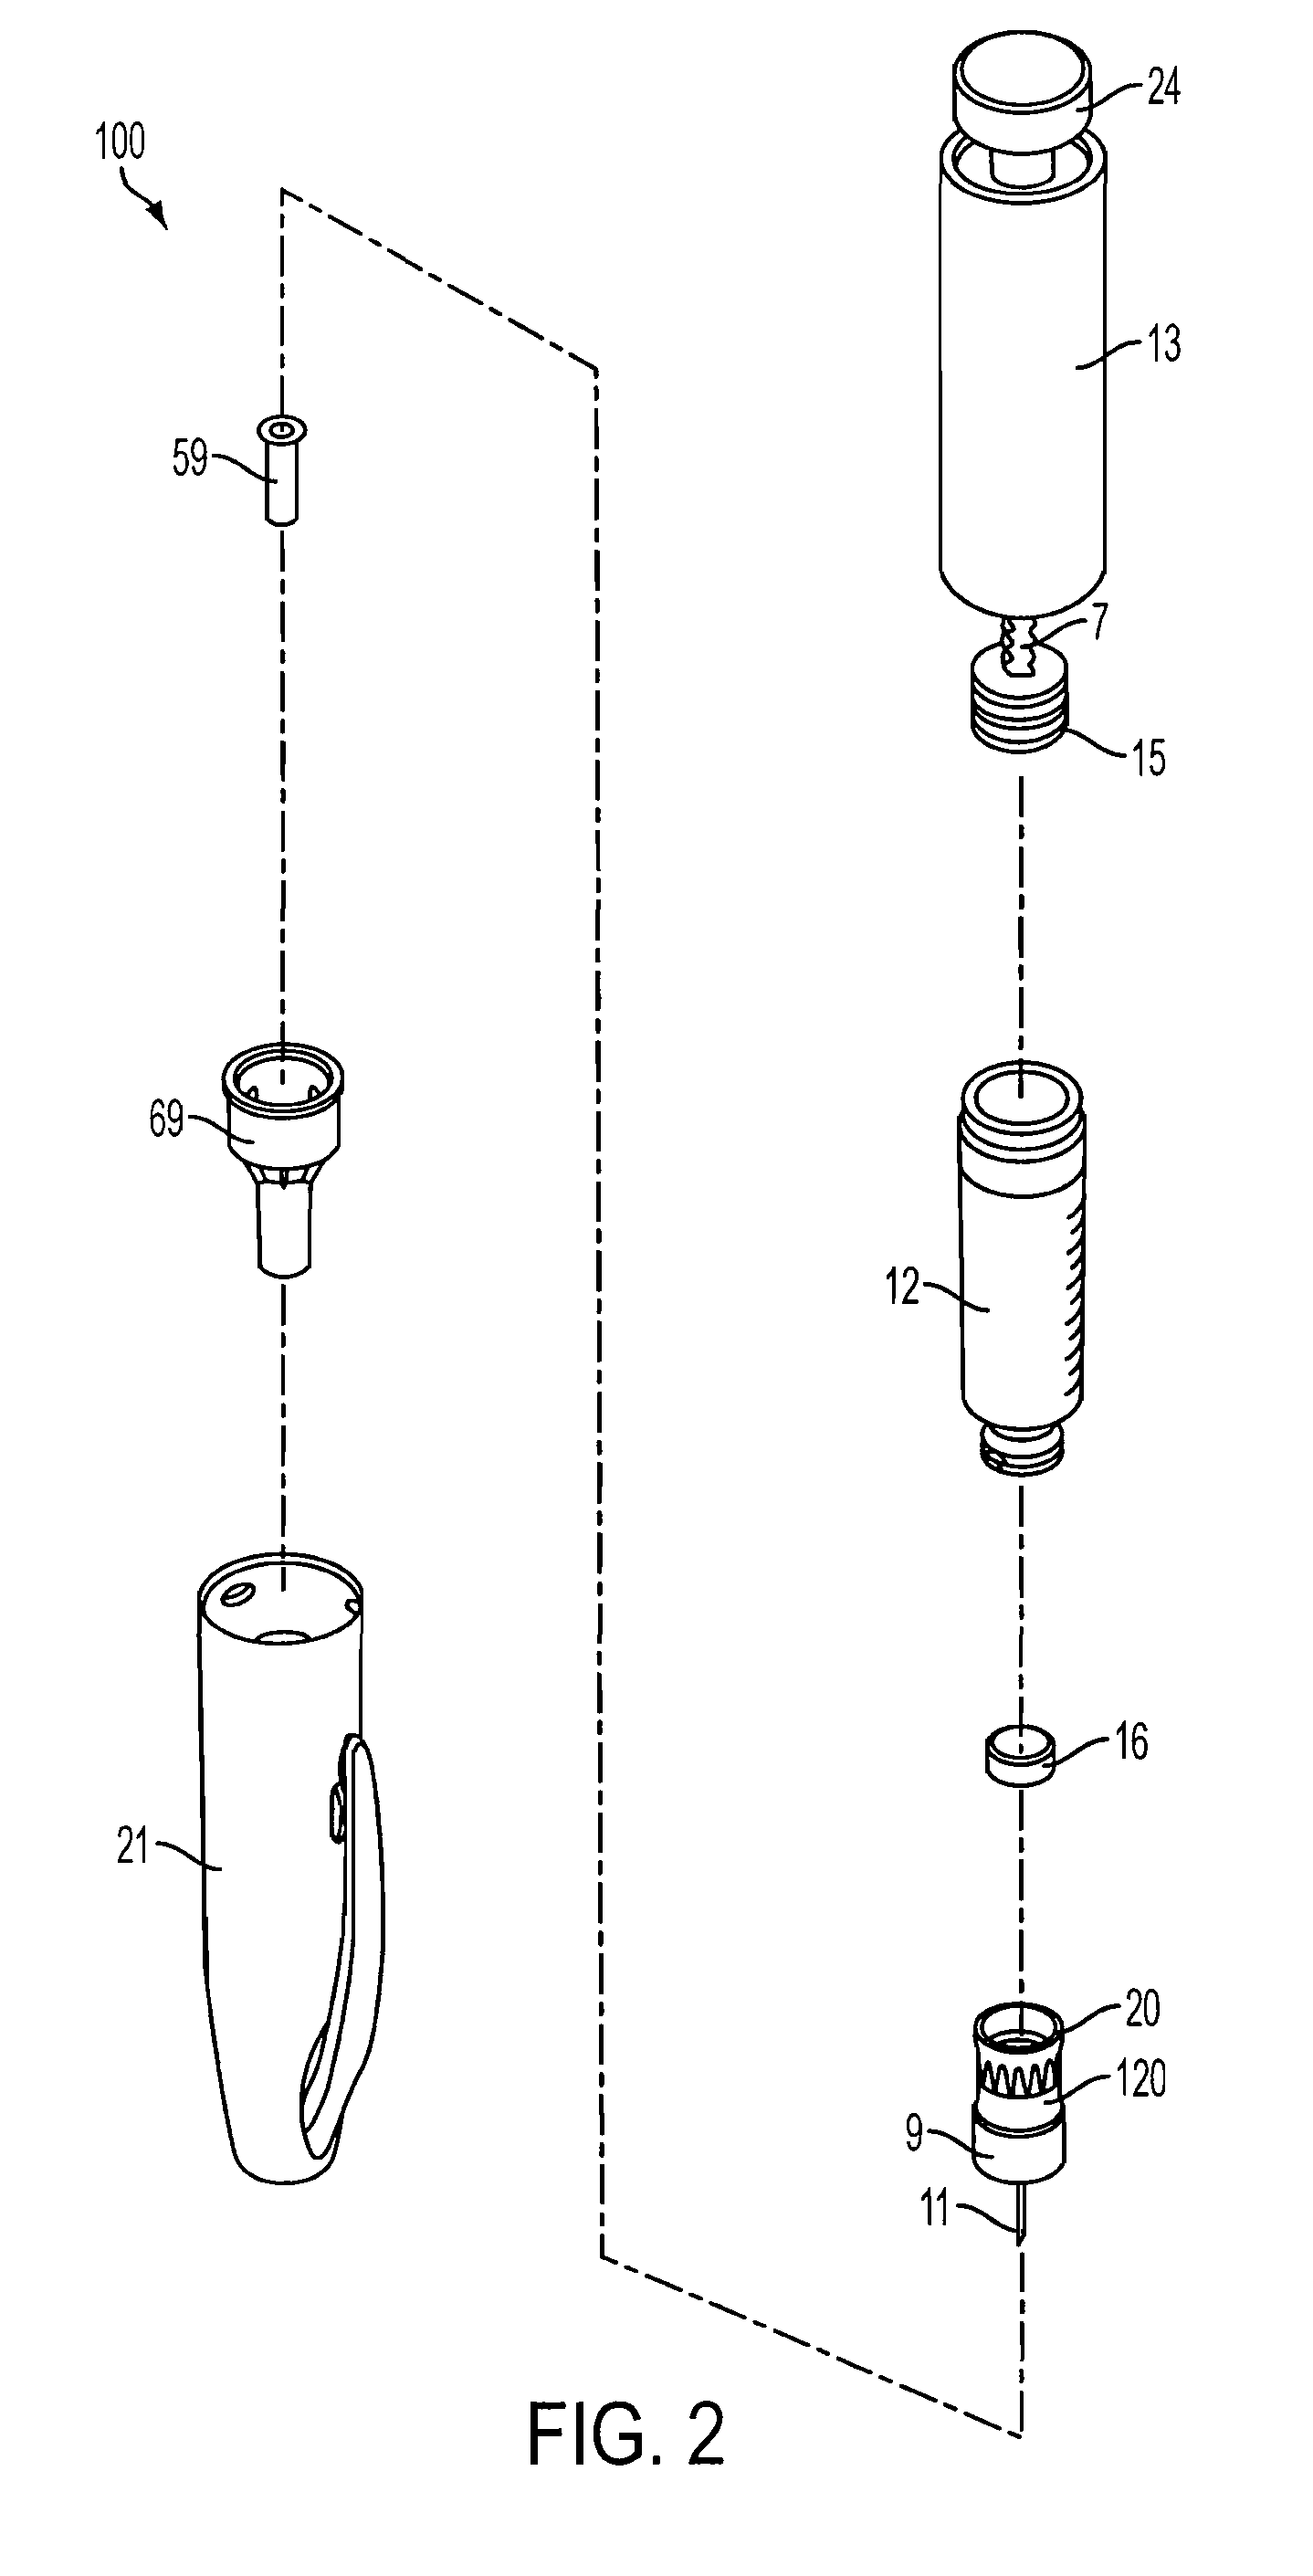 Pen needle assembly for preventing under-torquing and over-torquing of pen needle